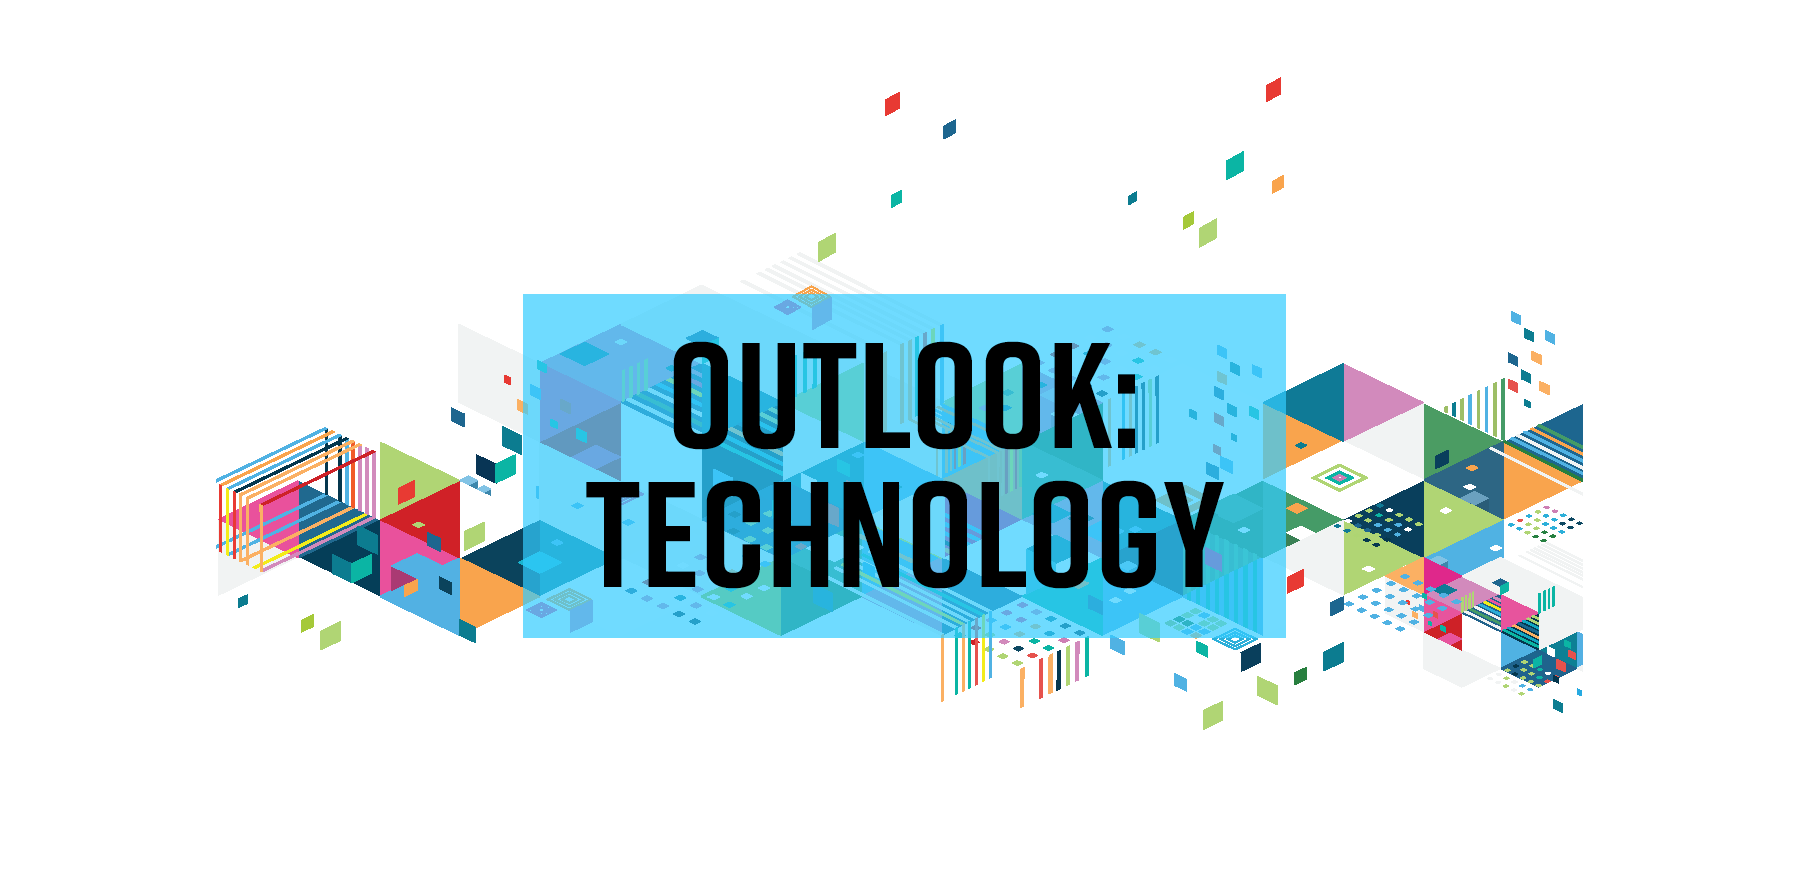 Outlook on campus technology in 2019